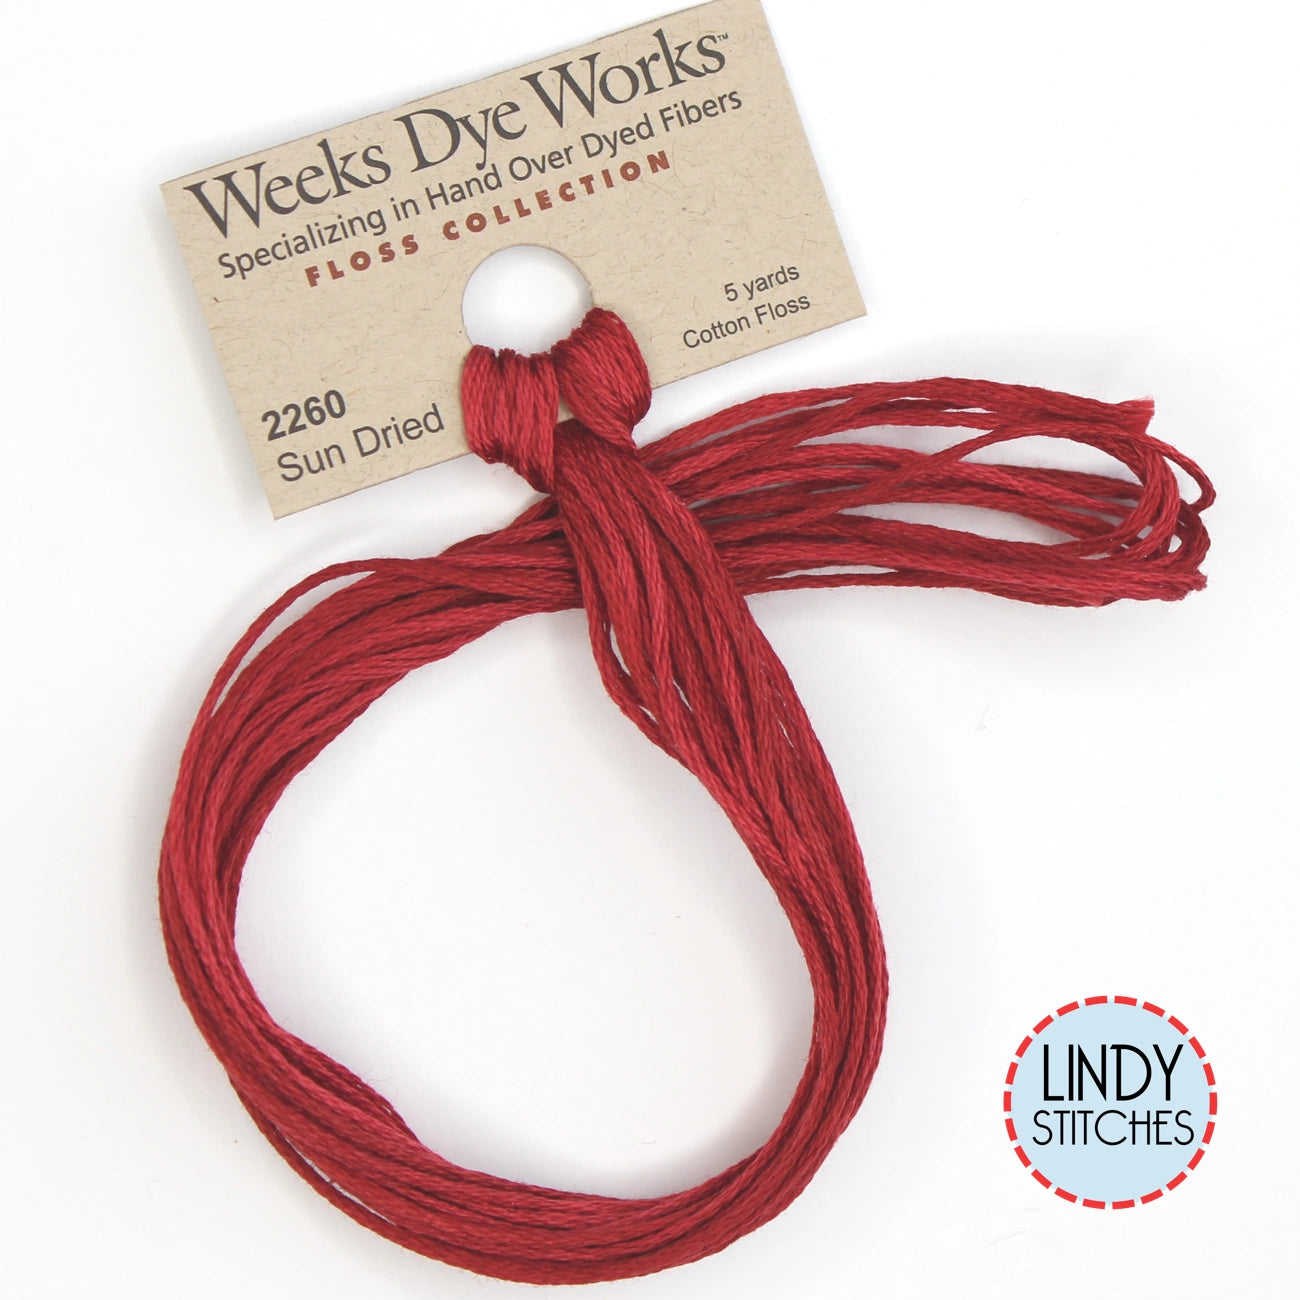 Sun Dried Weeks Dye Works Floss Hand Dyed Cotton Skein 2260